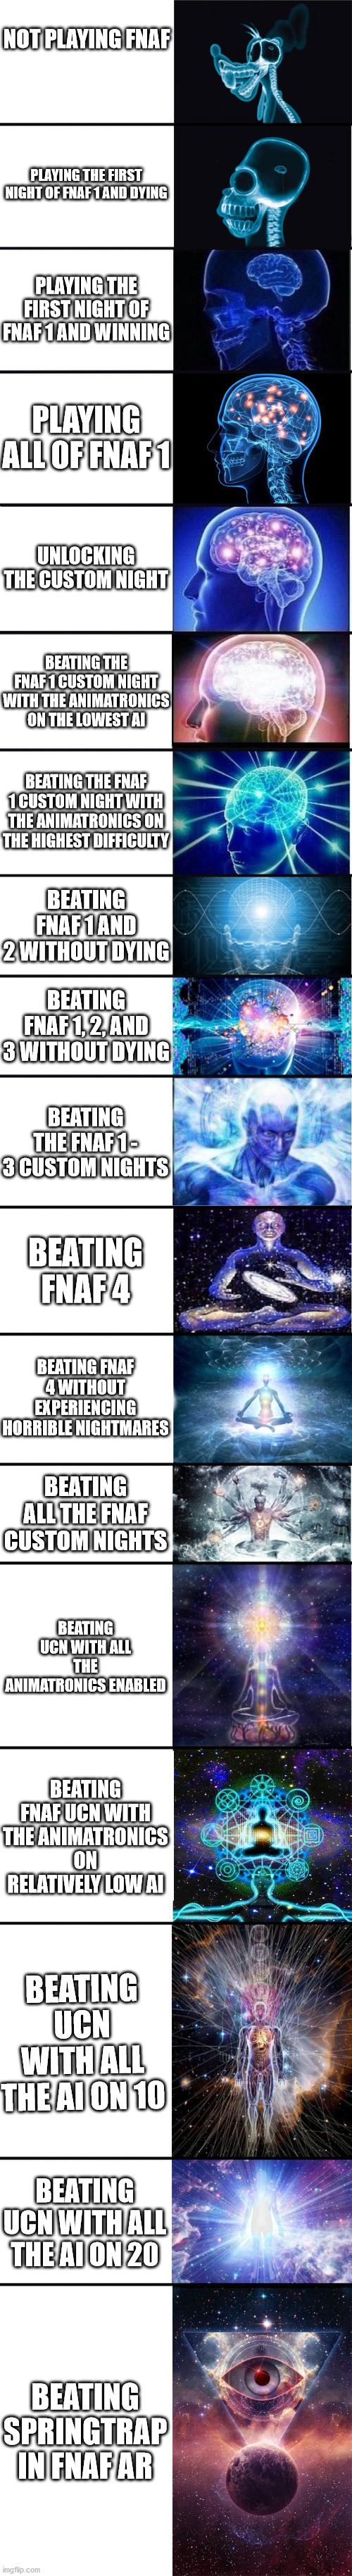 How smart you are based on how far you got in fnaf | NOT PLAYING FNAF; PLAYING THE FIRST NIGHT OF FNAF 1 AND DYING; PLAYING THE FIRST NIGHT OF FNAF 1 AND WINNING; PLAYING ALL OF FNAF 1; UNLOCKING THE CUSTOM NIGHT; BEATING THE FNAF 1 CUSTOM NIGHT WITH THE ANIMATRONICS ON THE LOWEST AI; BEATING THE FNAF 1 CUSTOM NIGHT WITH THE ANIMATRONICS ON THE HIGHEST DIFFICULTY; BEATING FNAF 1 AND 2 WITHOUT DYING; BEATING FNAF 1, 2, AND 3 WITHOUT DYING; BEATING THE FNAF 1 - 3 CUSTOM NIGHTS; BEATING FNAF 4; BEATING FNAF 4 WITHOUT EXPERIENCING HORRIBLE NIGHTMARES; BEATING ALL THE FNAF CUSTOM NIGHTS; BEATING UCN WITH ALL THE ANIMATRONICS ENABLED; BEATING FNAF UCN WITH THE ANIMATRONICS ON RELATIVELY LOW AI; BEATING UCN WITH ALL THE AI ON 10; BEATING UCN WITH ALL THE AI ON 20; BEATING SPRINGTRAP IN FNAF AR | image tagged in expanding brain 9001,fnaf,five nights at freddys,expanding brain | made w/ Imgflip meme maker